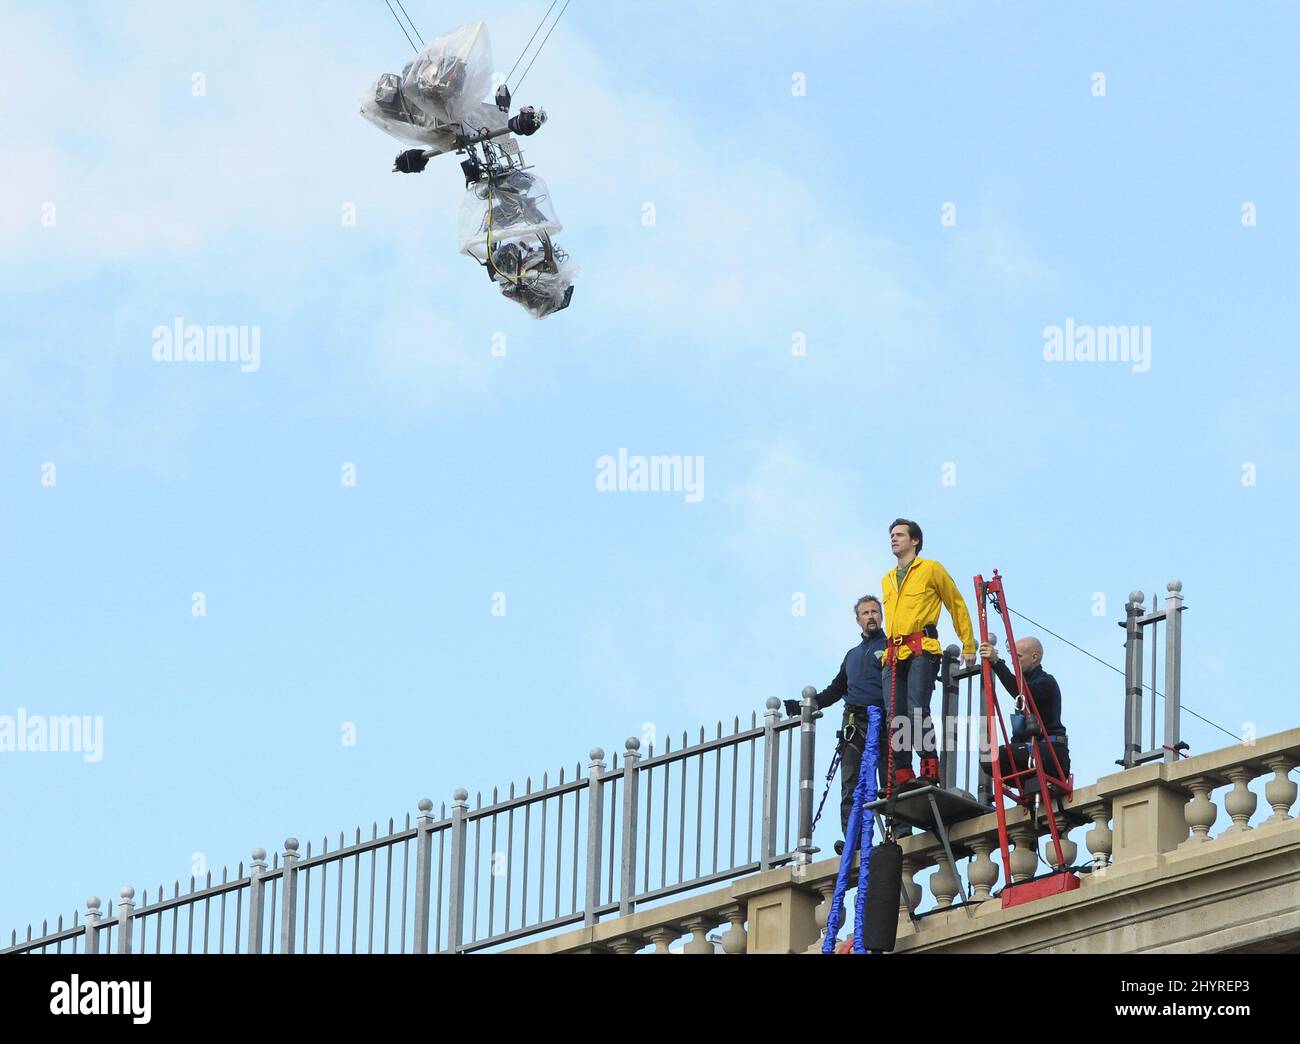 Jim Carrey bungee jumps during filming of his new movie "Yes Man" held at the Arroyo Seco Bridge in Pasadena, CA. Stock Photo